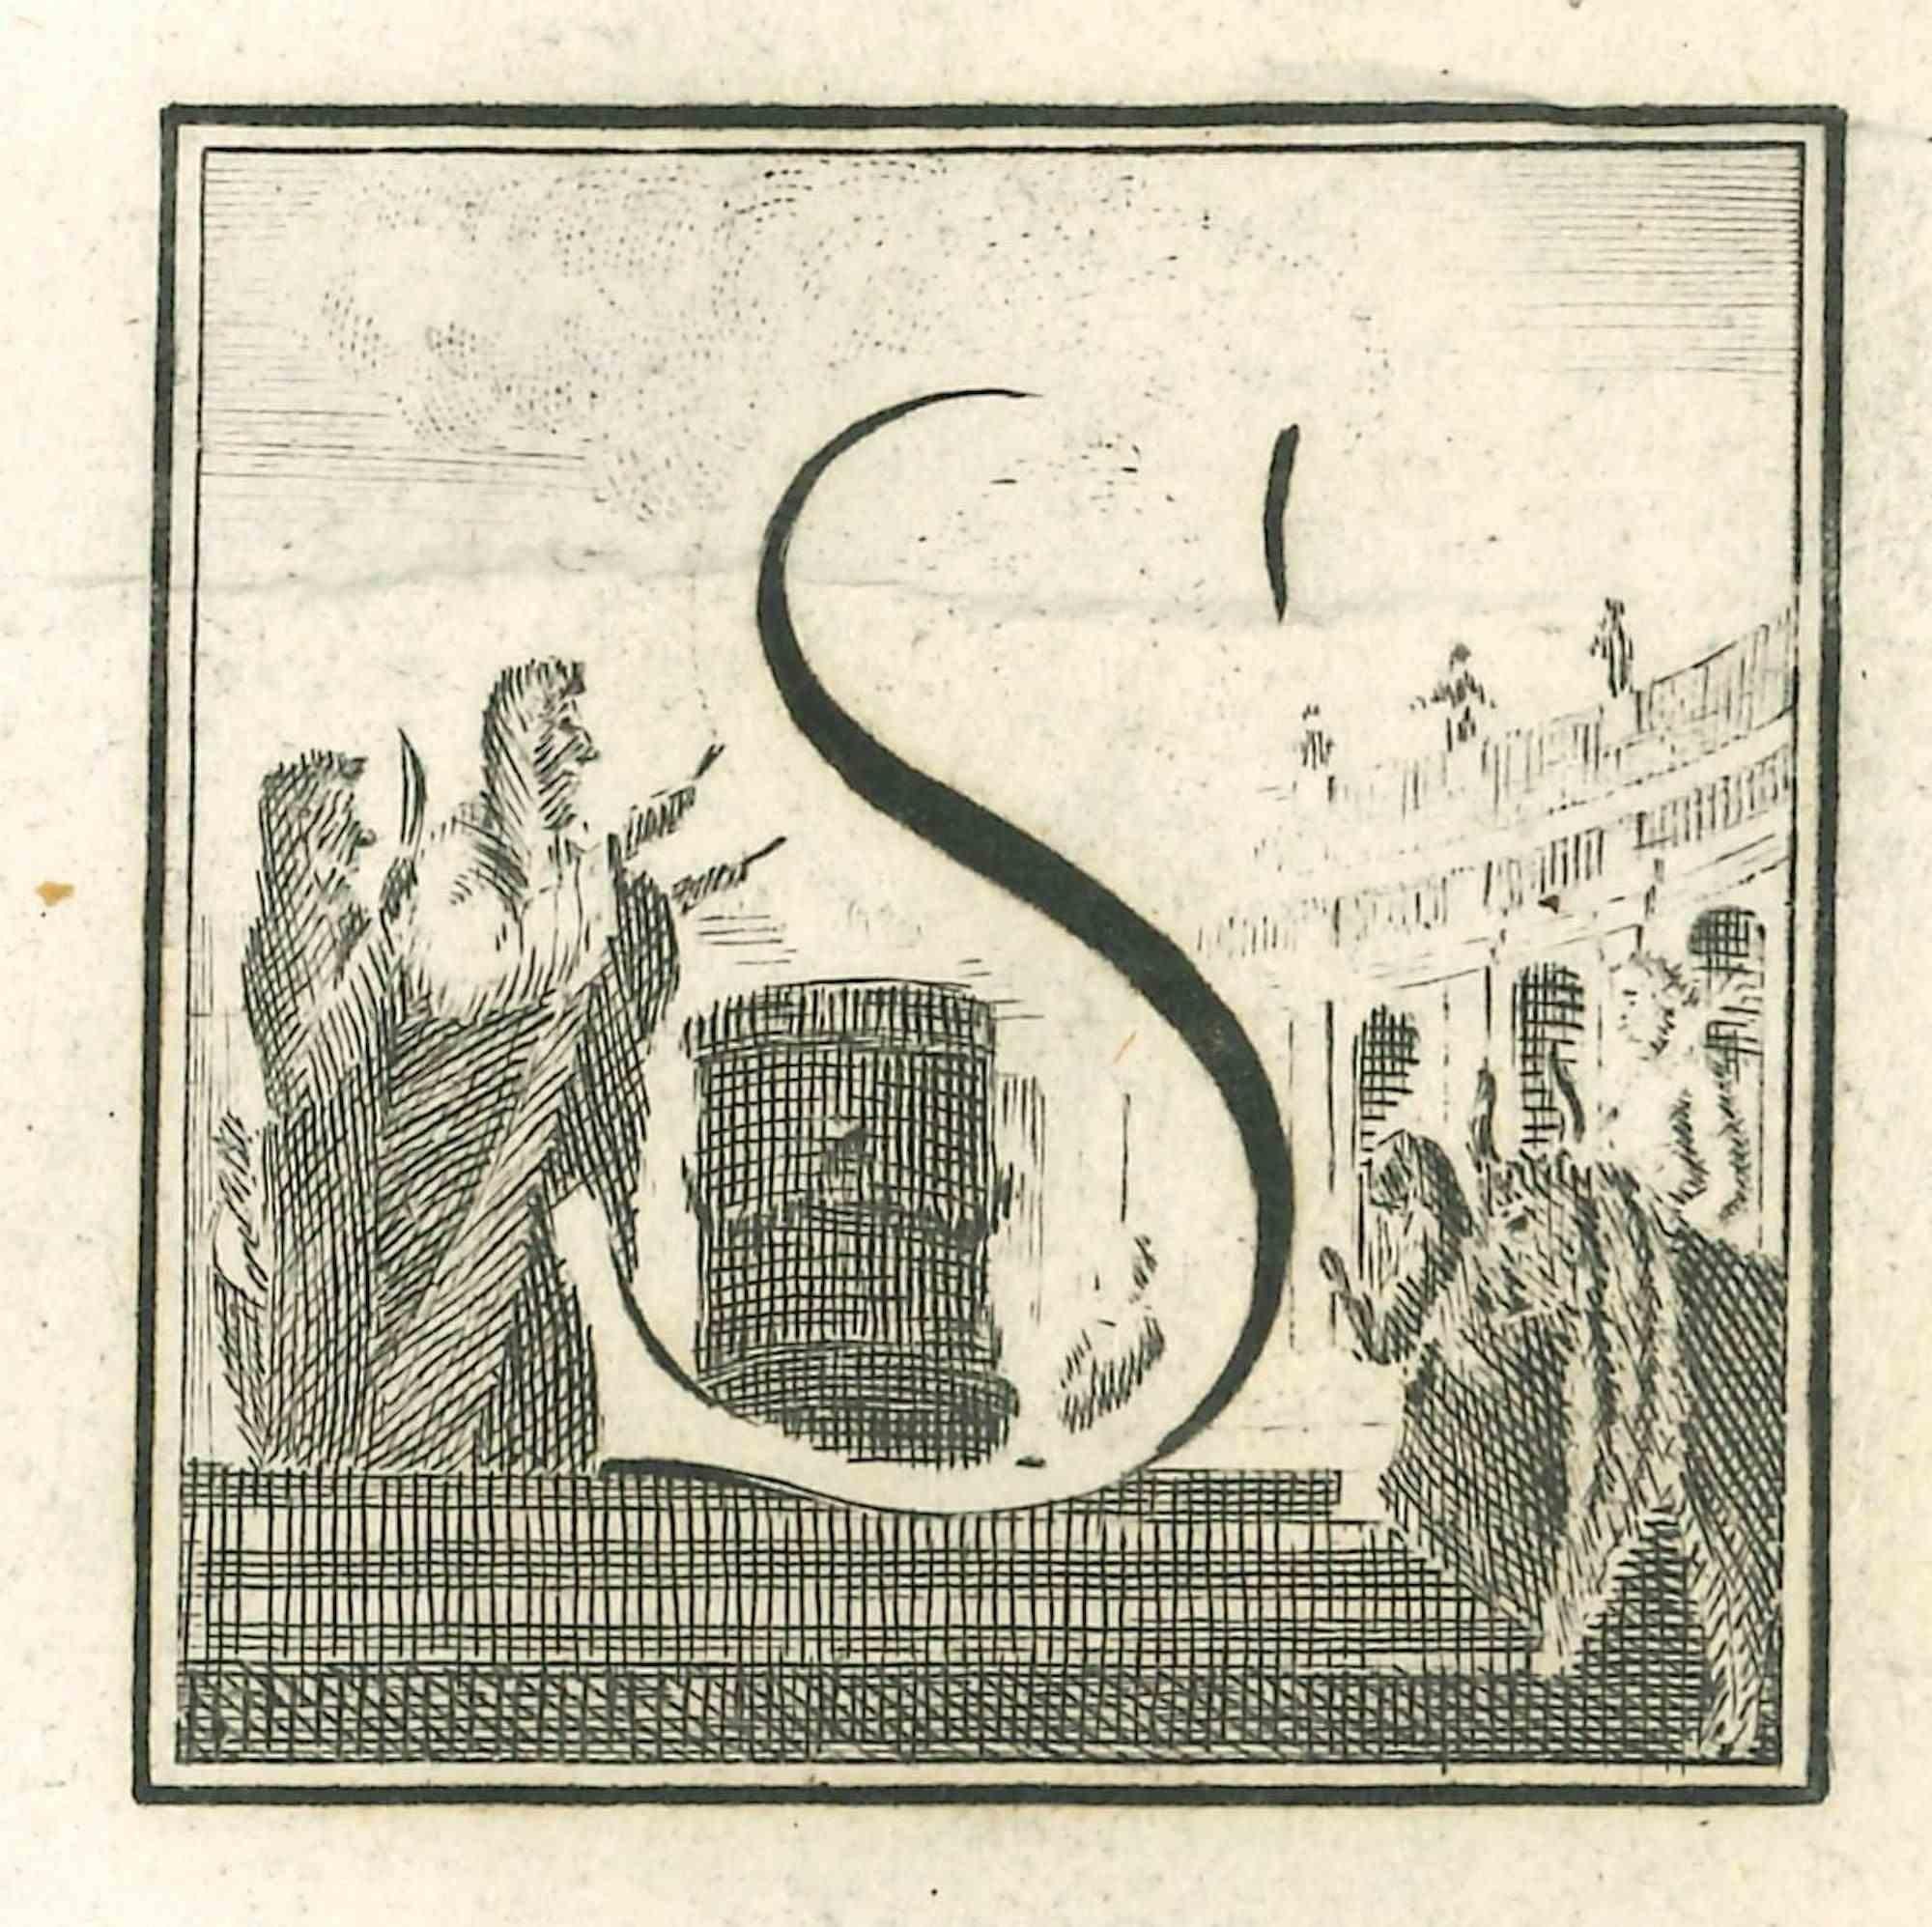 Letter of the Alphabet S,  from the series "Antiquities of Herculaneum", is an etching on paper realized by Luigi Vanvitelli in the 18th century.

Good conditions with slight folding.

The etching belongs to the print suite “Antiquities of